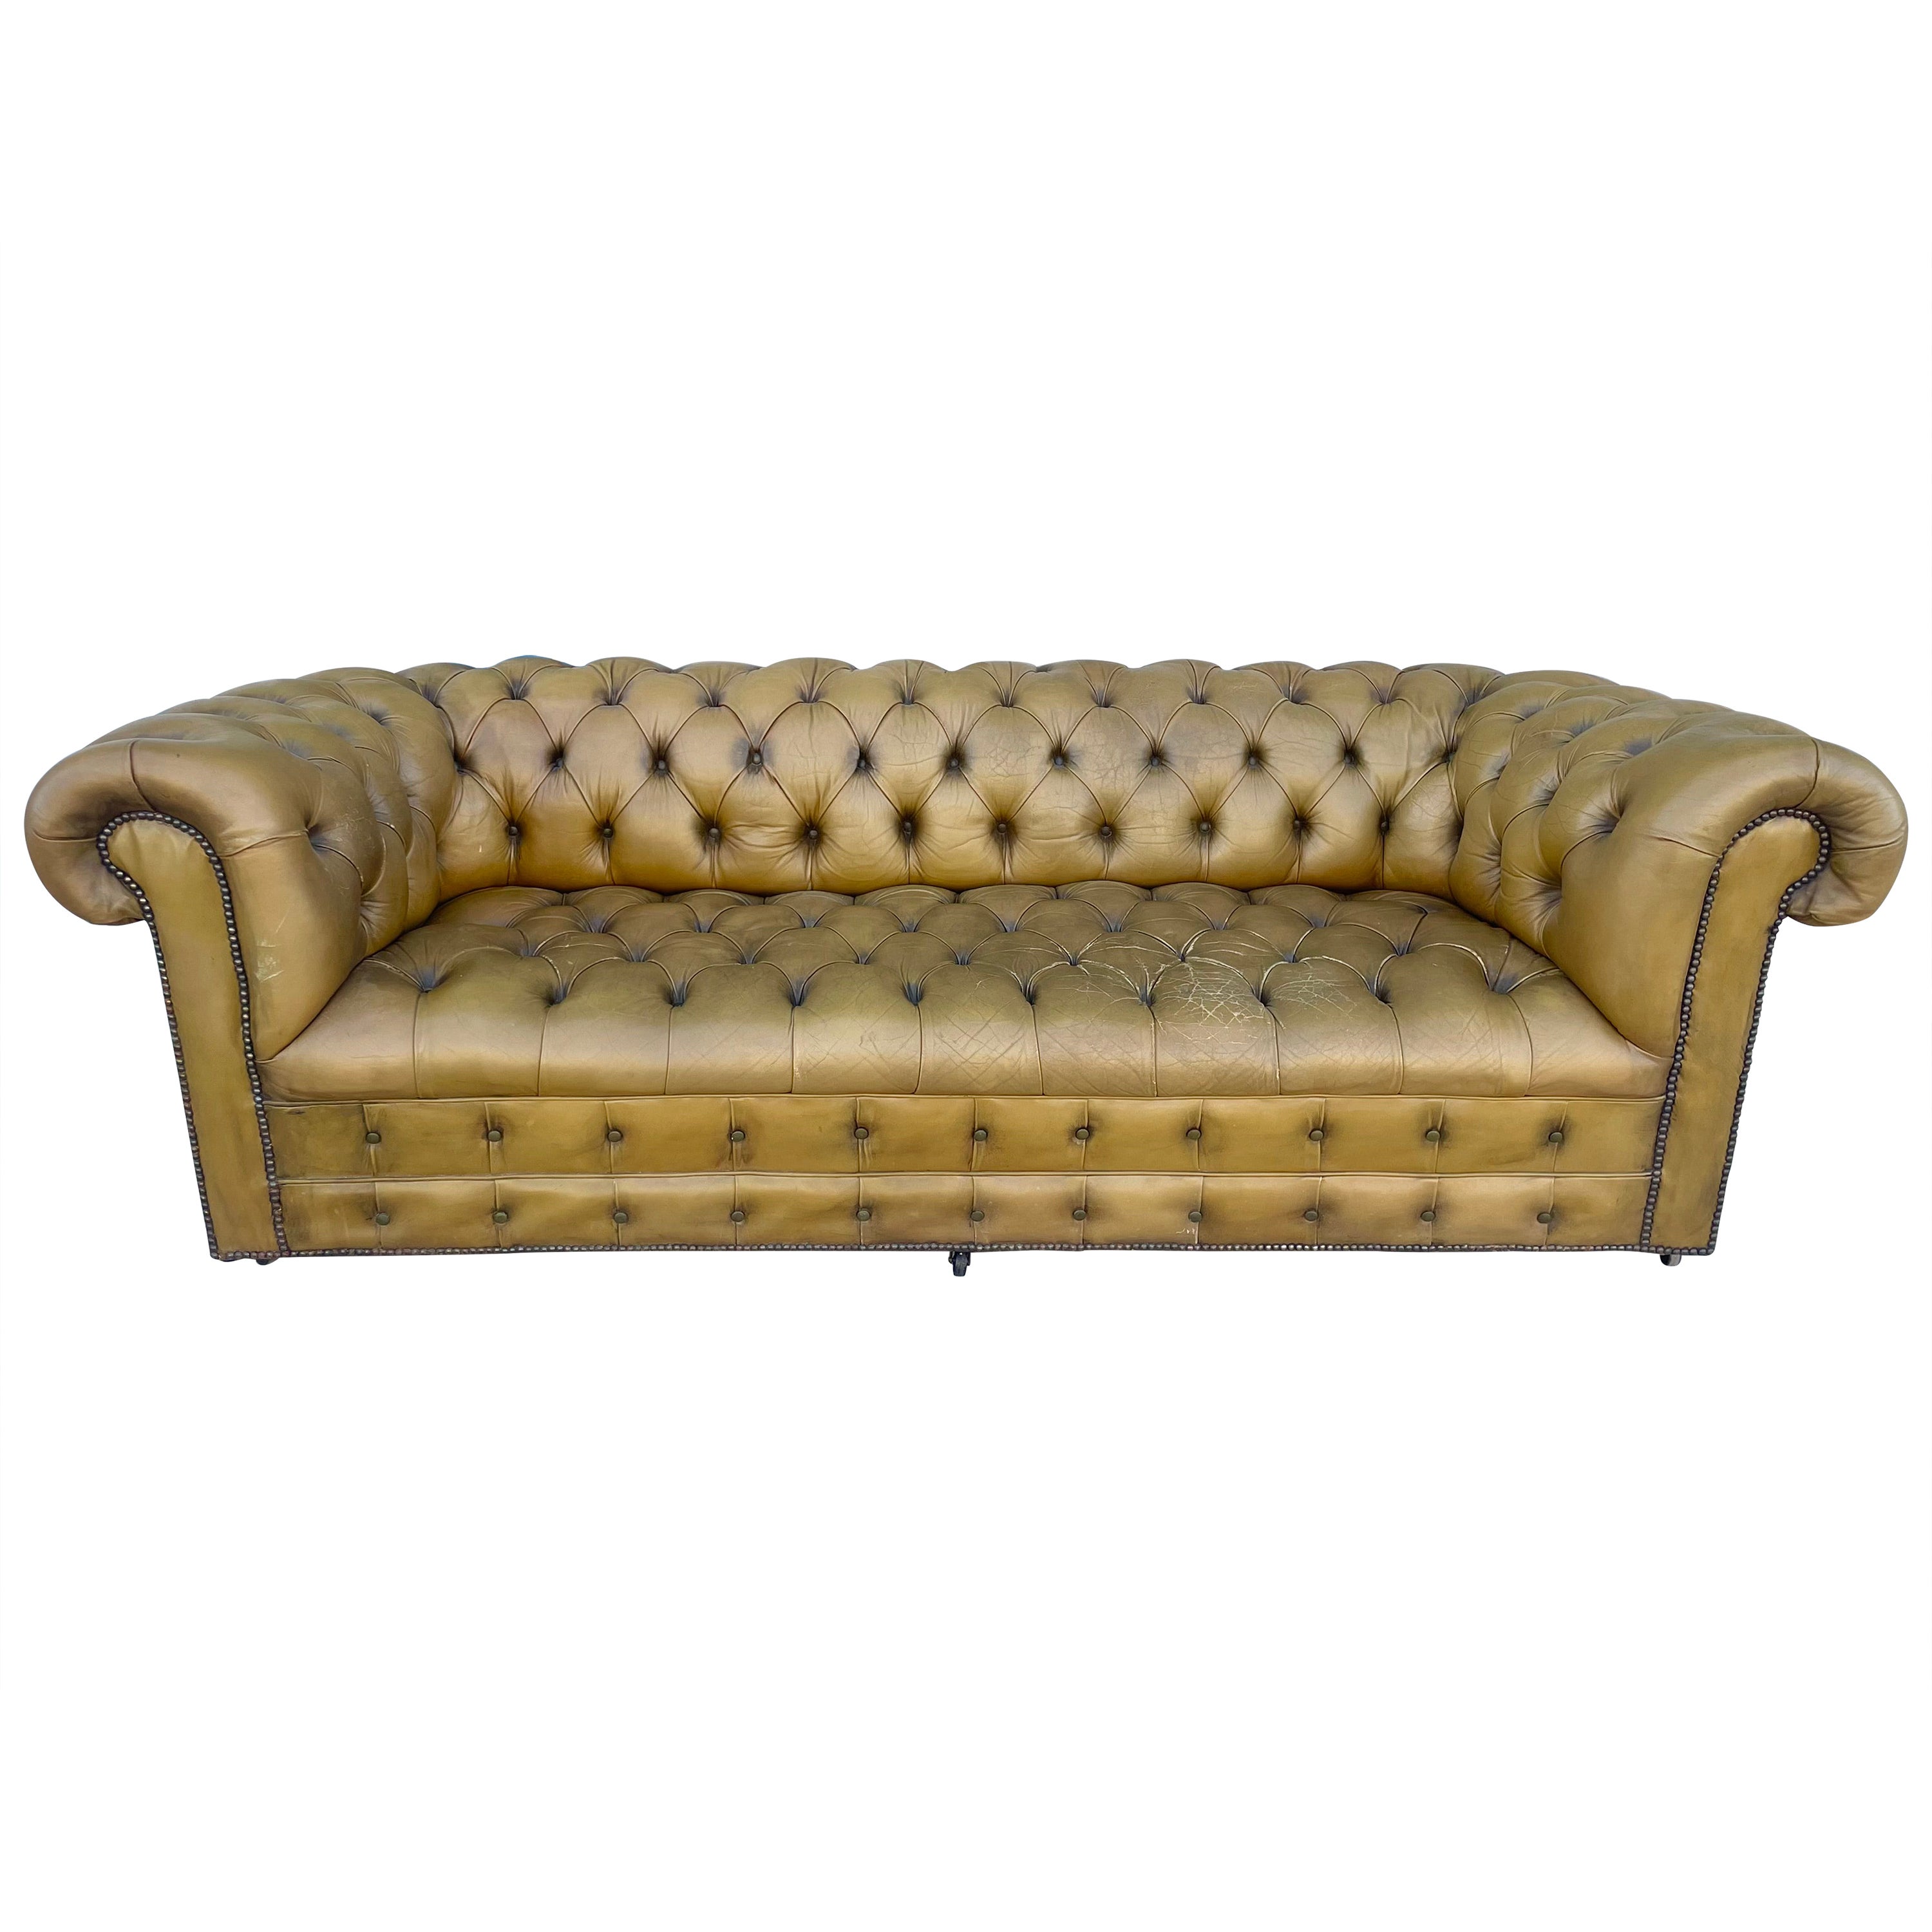 1960s Vintage Tufted Leather Sofa For Sale